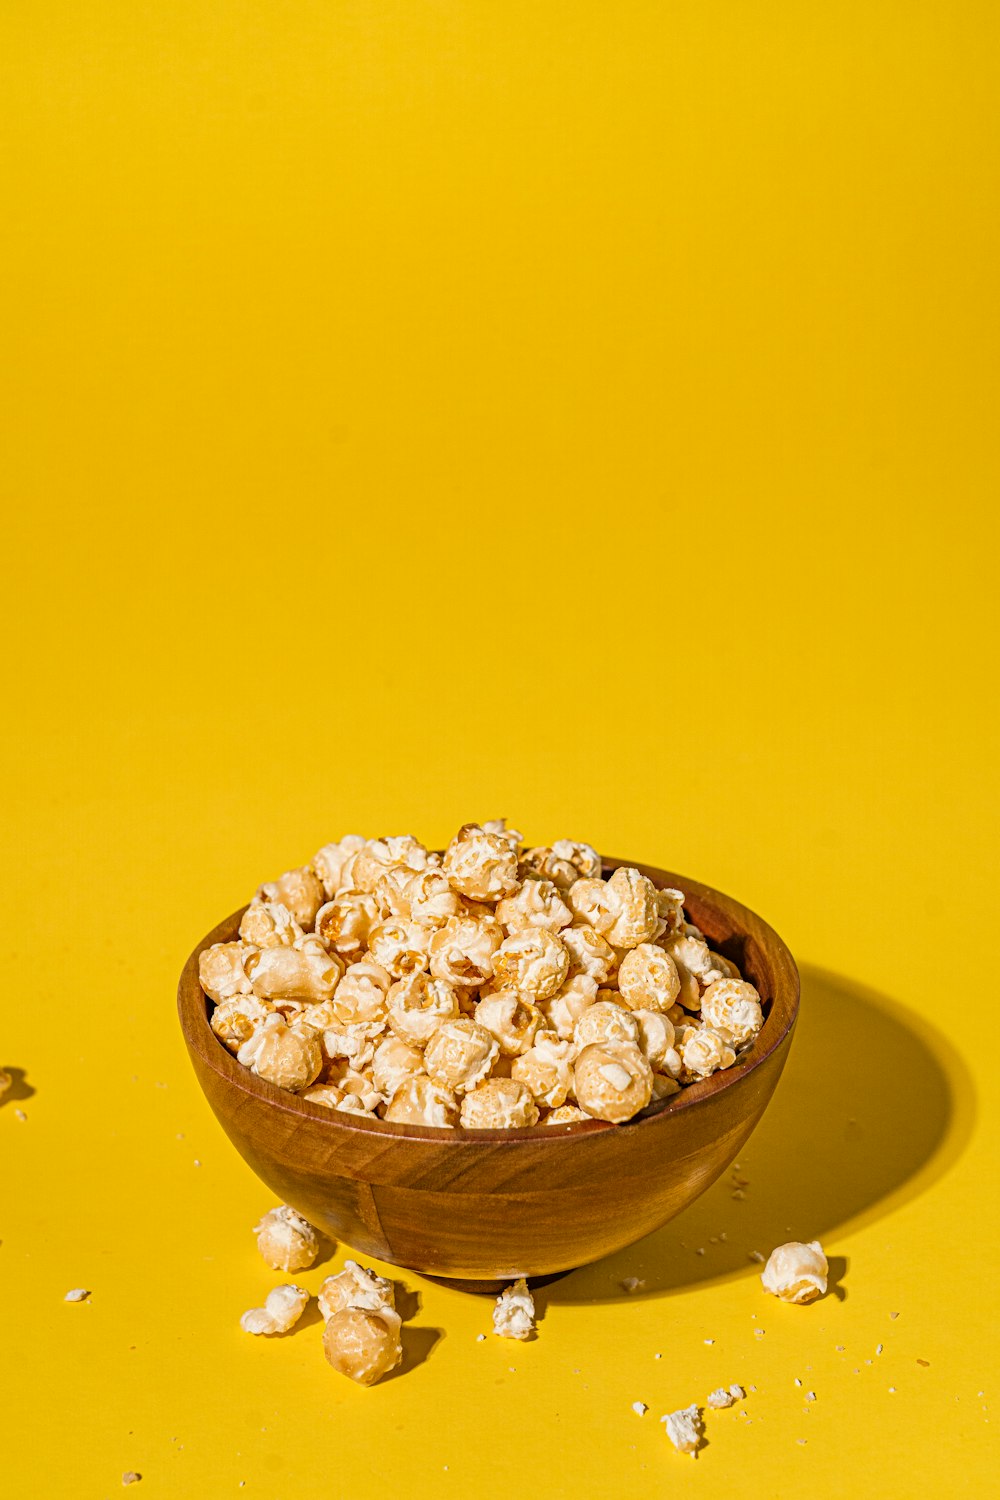 a wooden bowl filled with popcorn on a yellow background